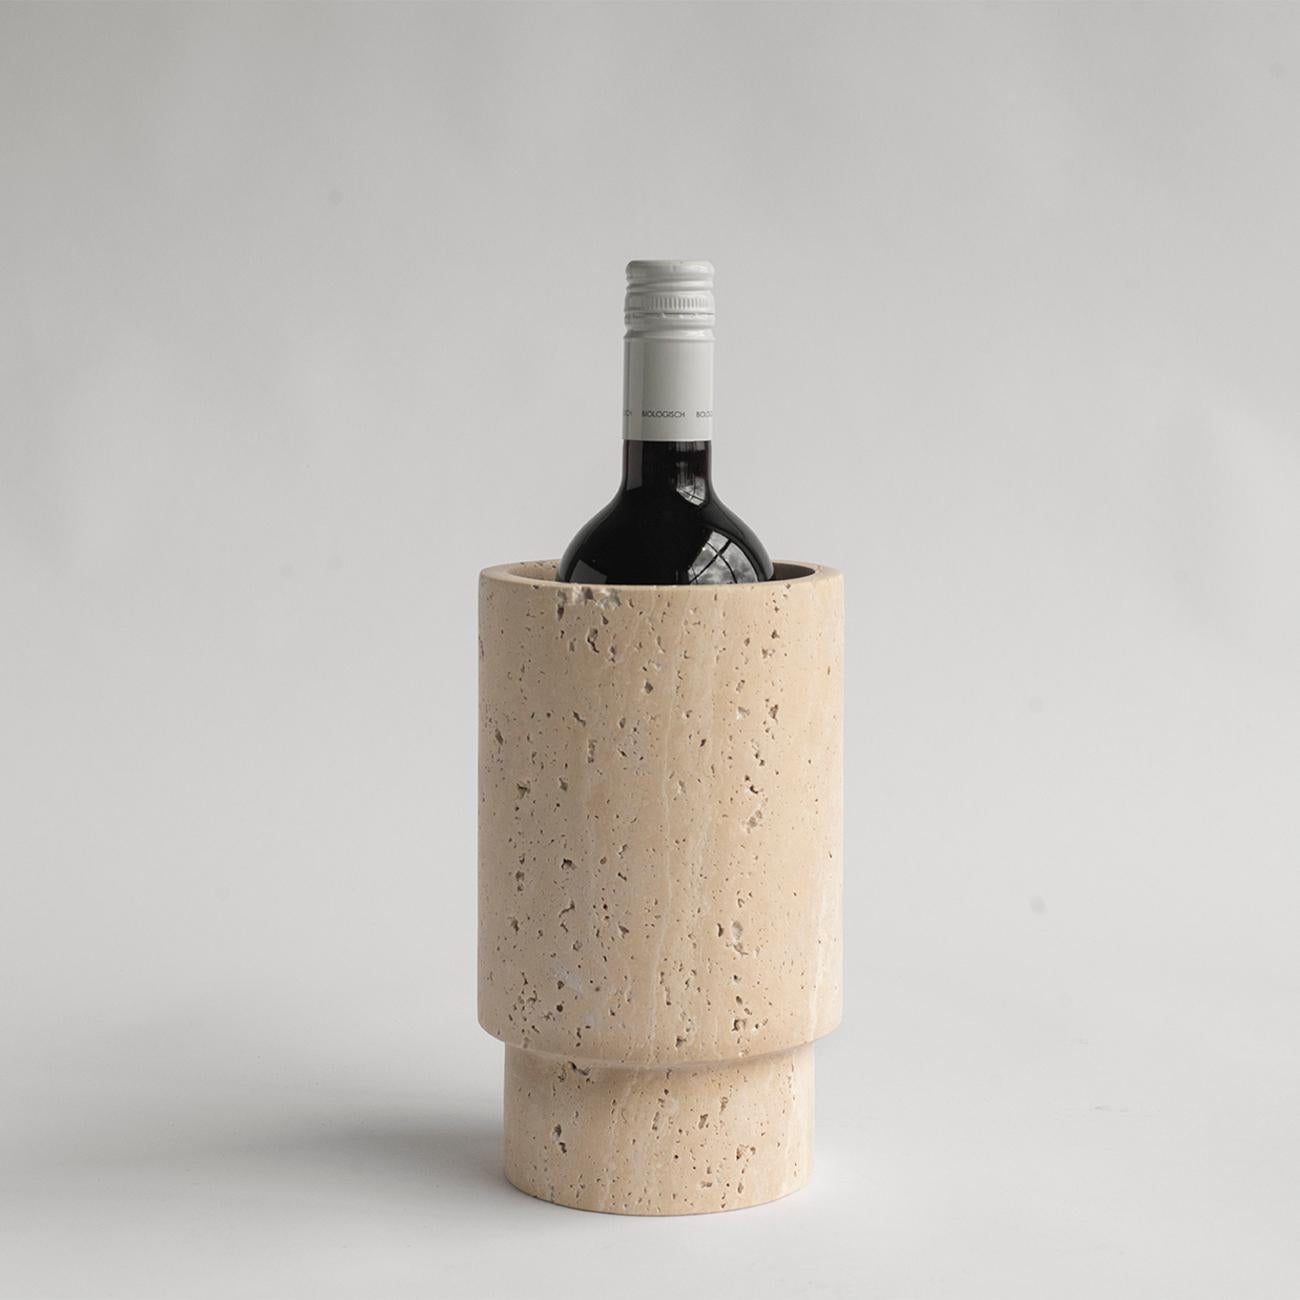 Our wine cooler is designed by us and hand crafted by the artisans within the fair-trade principles.

Crafted from a natural travertine stone, this vessel will be sure to win your heart. It can be used to hold your wine bottle, blooms, kitchen